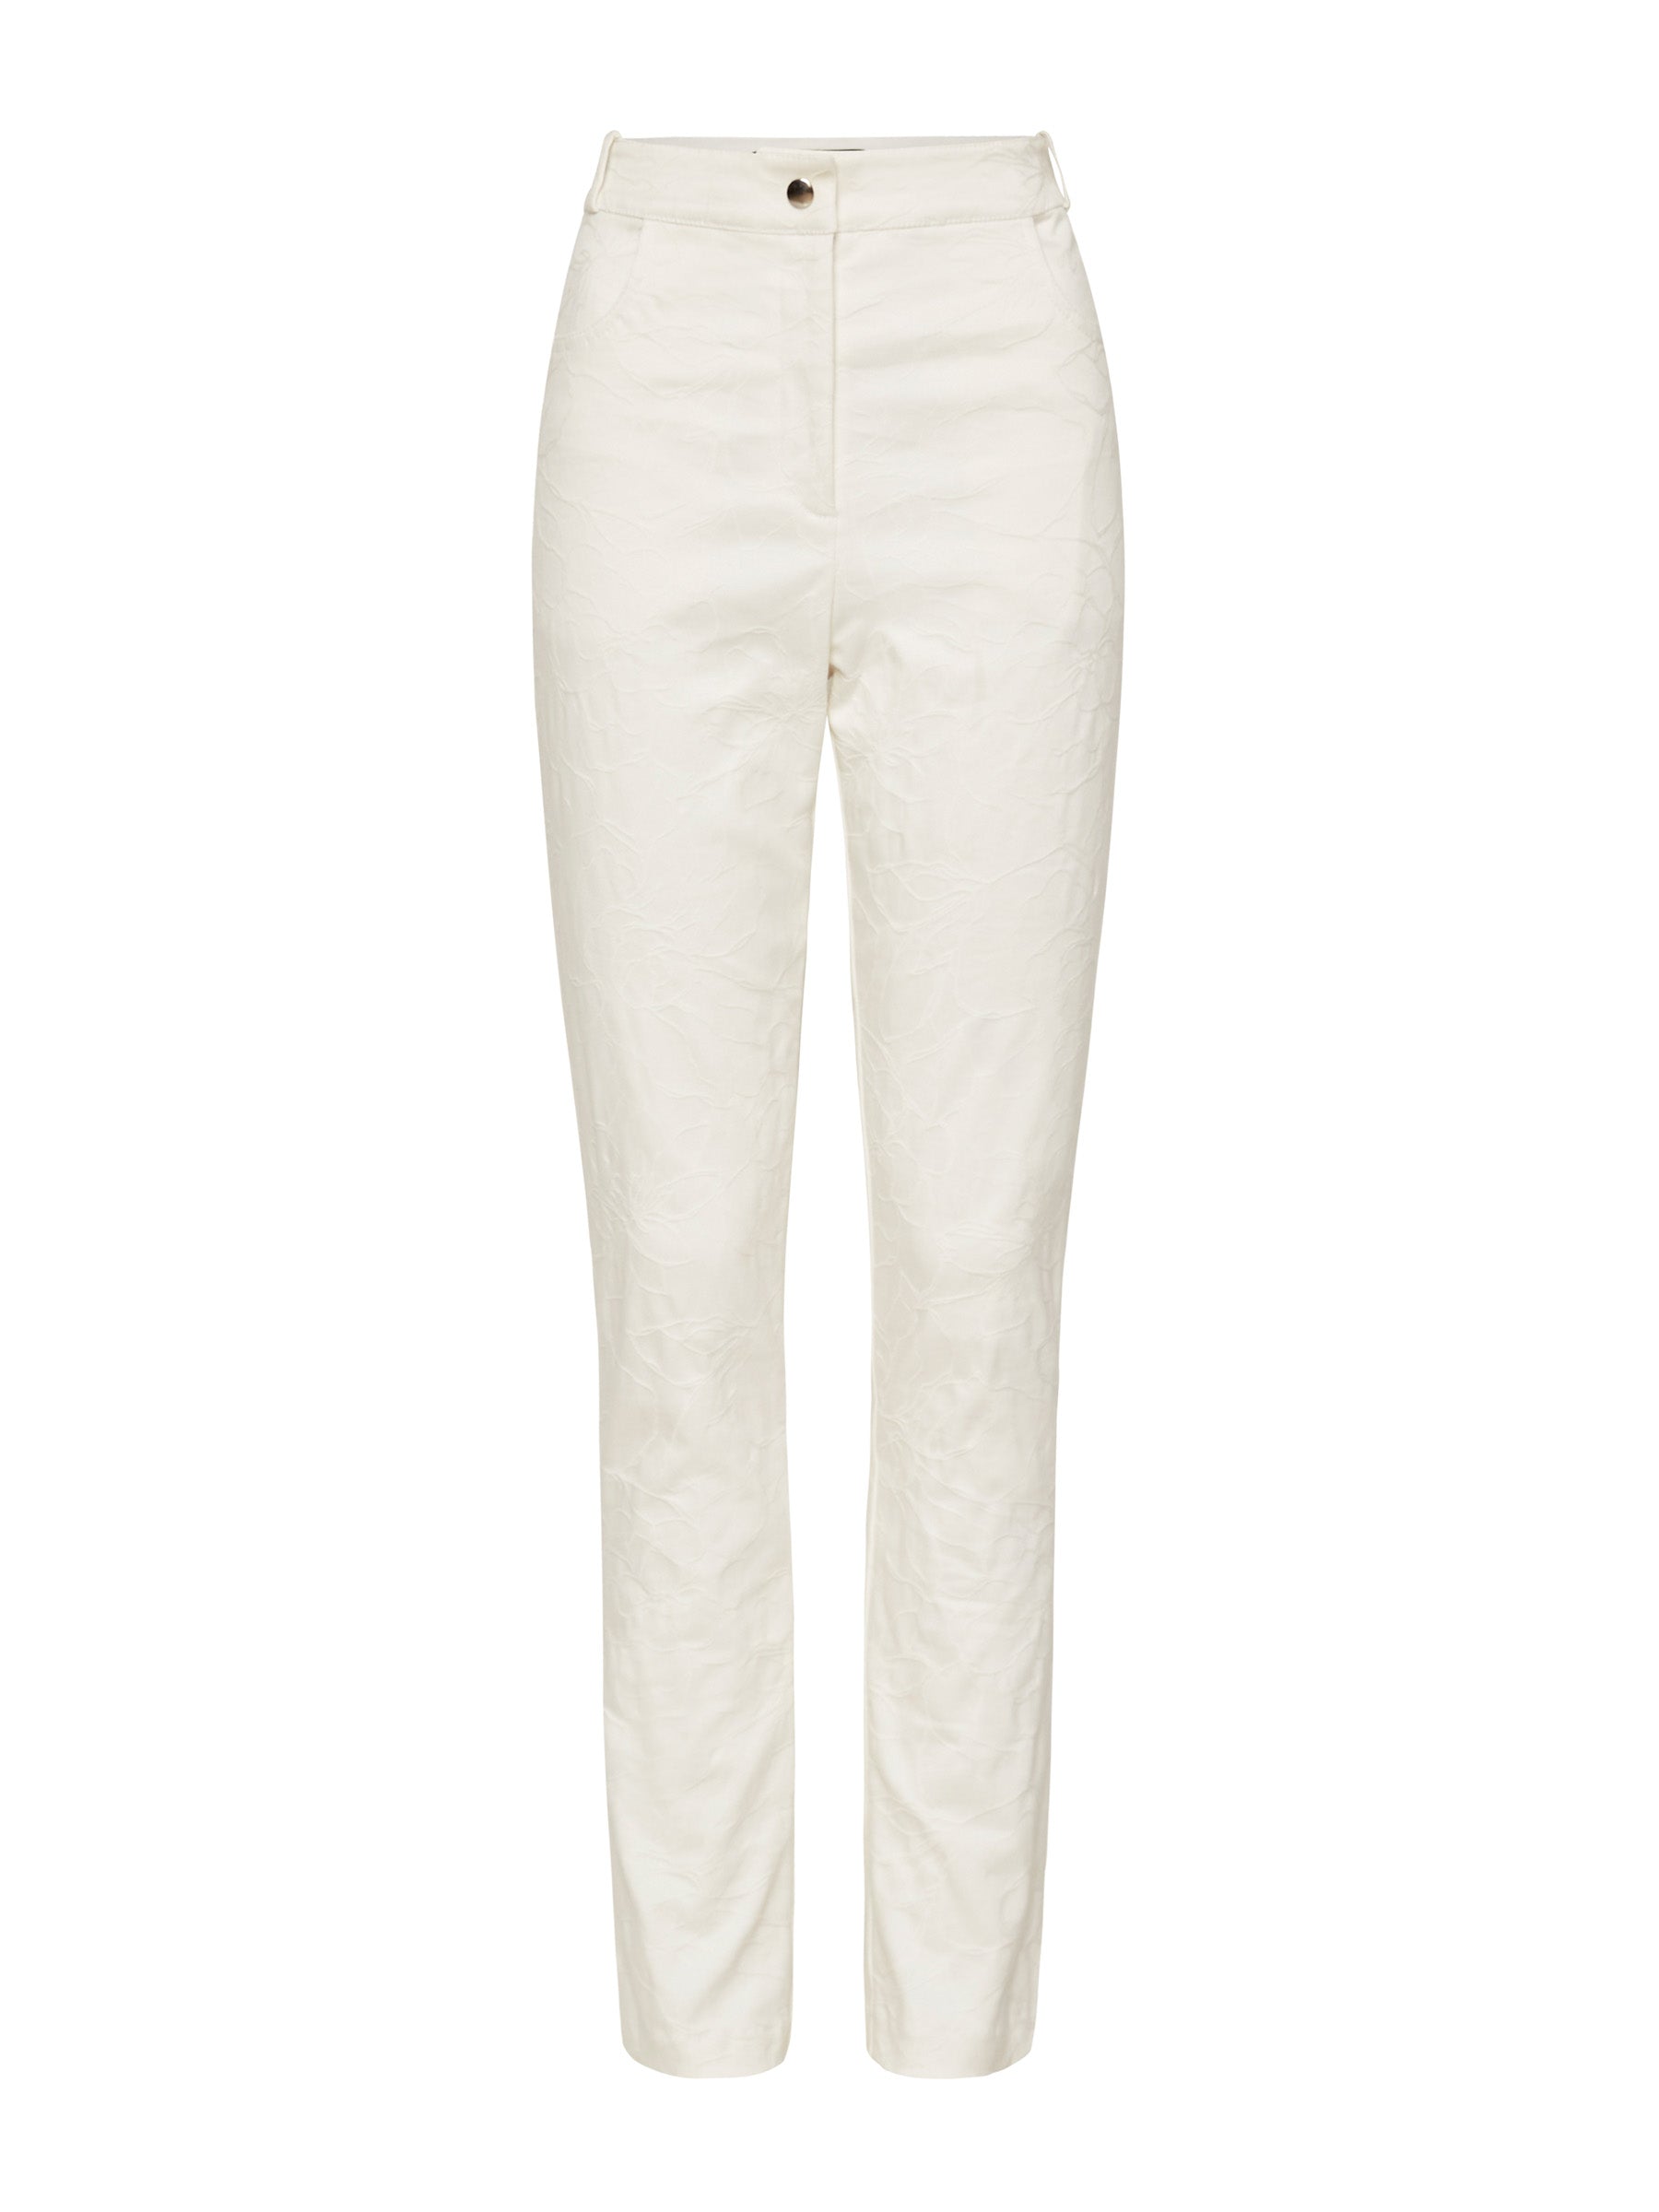 Leona Jean - Ivory White (Size 12 + 14 Only)